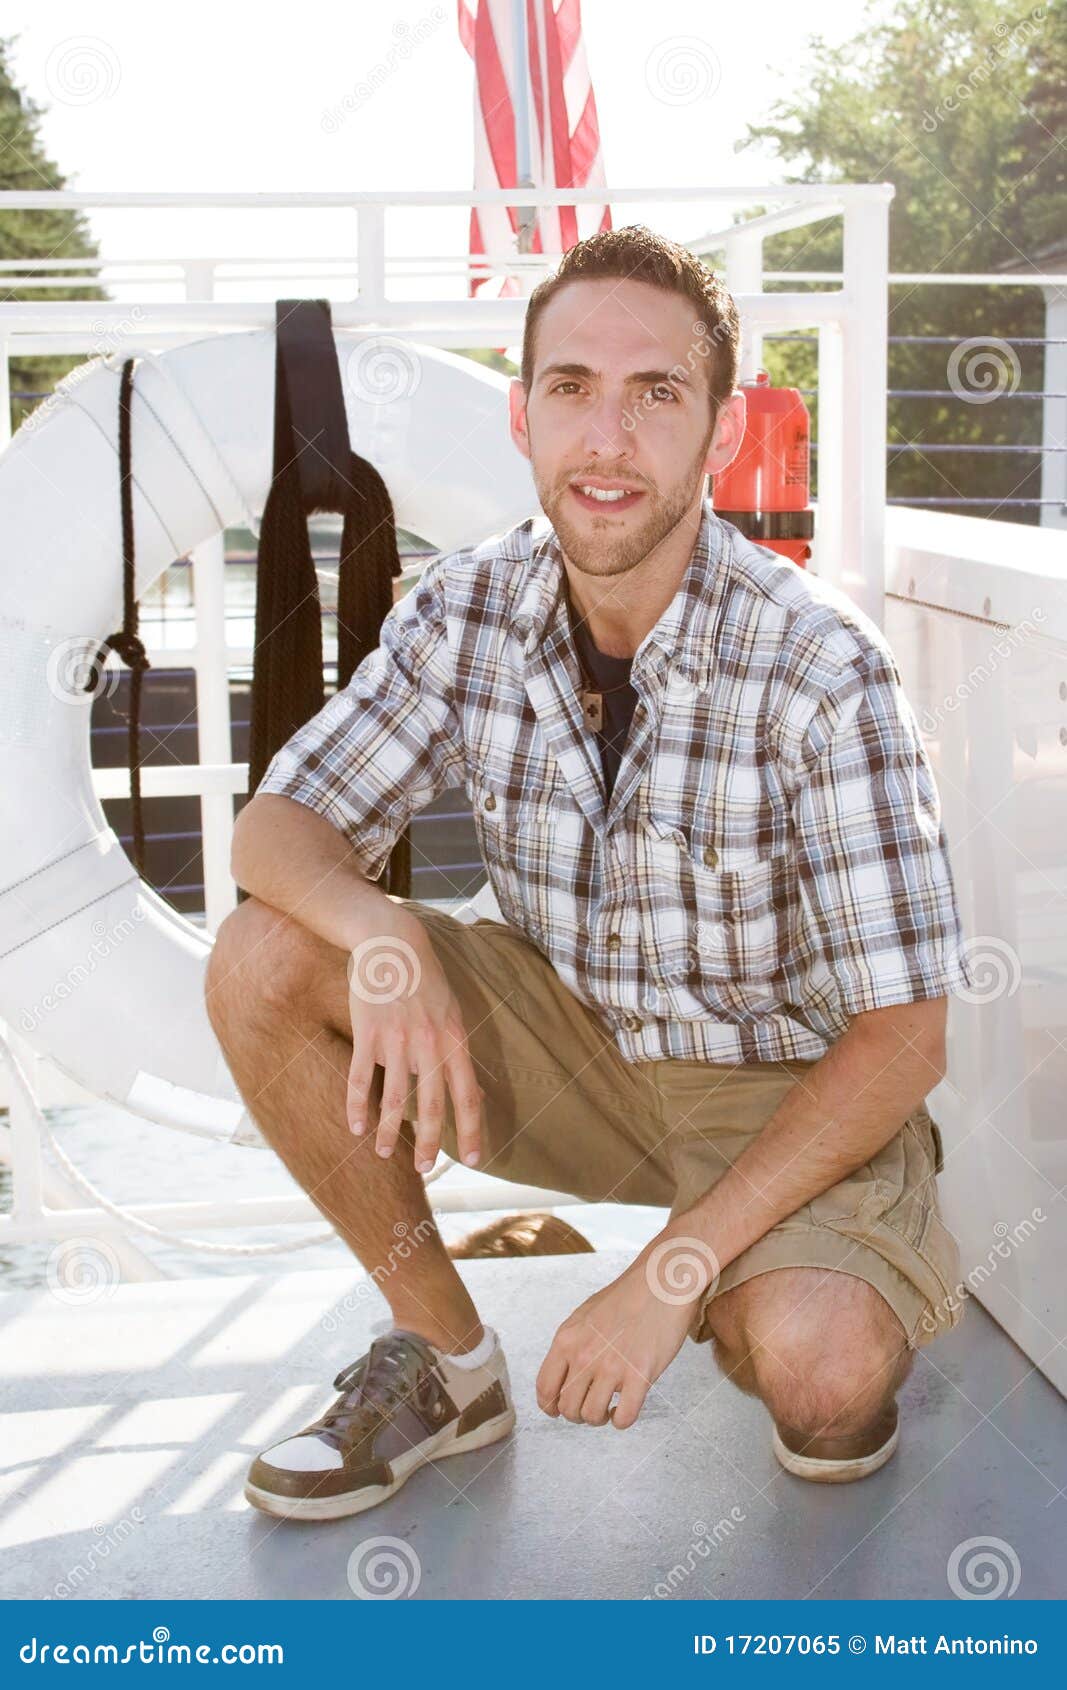 Man kneeling on a boat stock image. Image of young, casual - 17207065